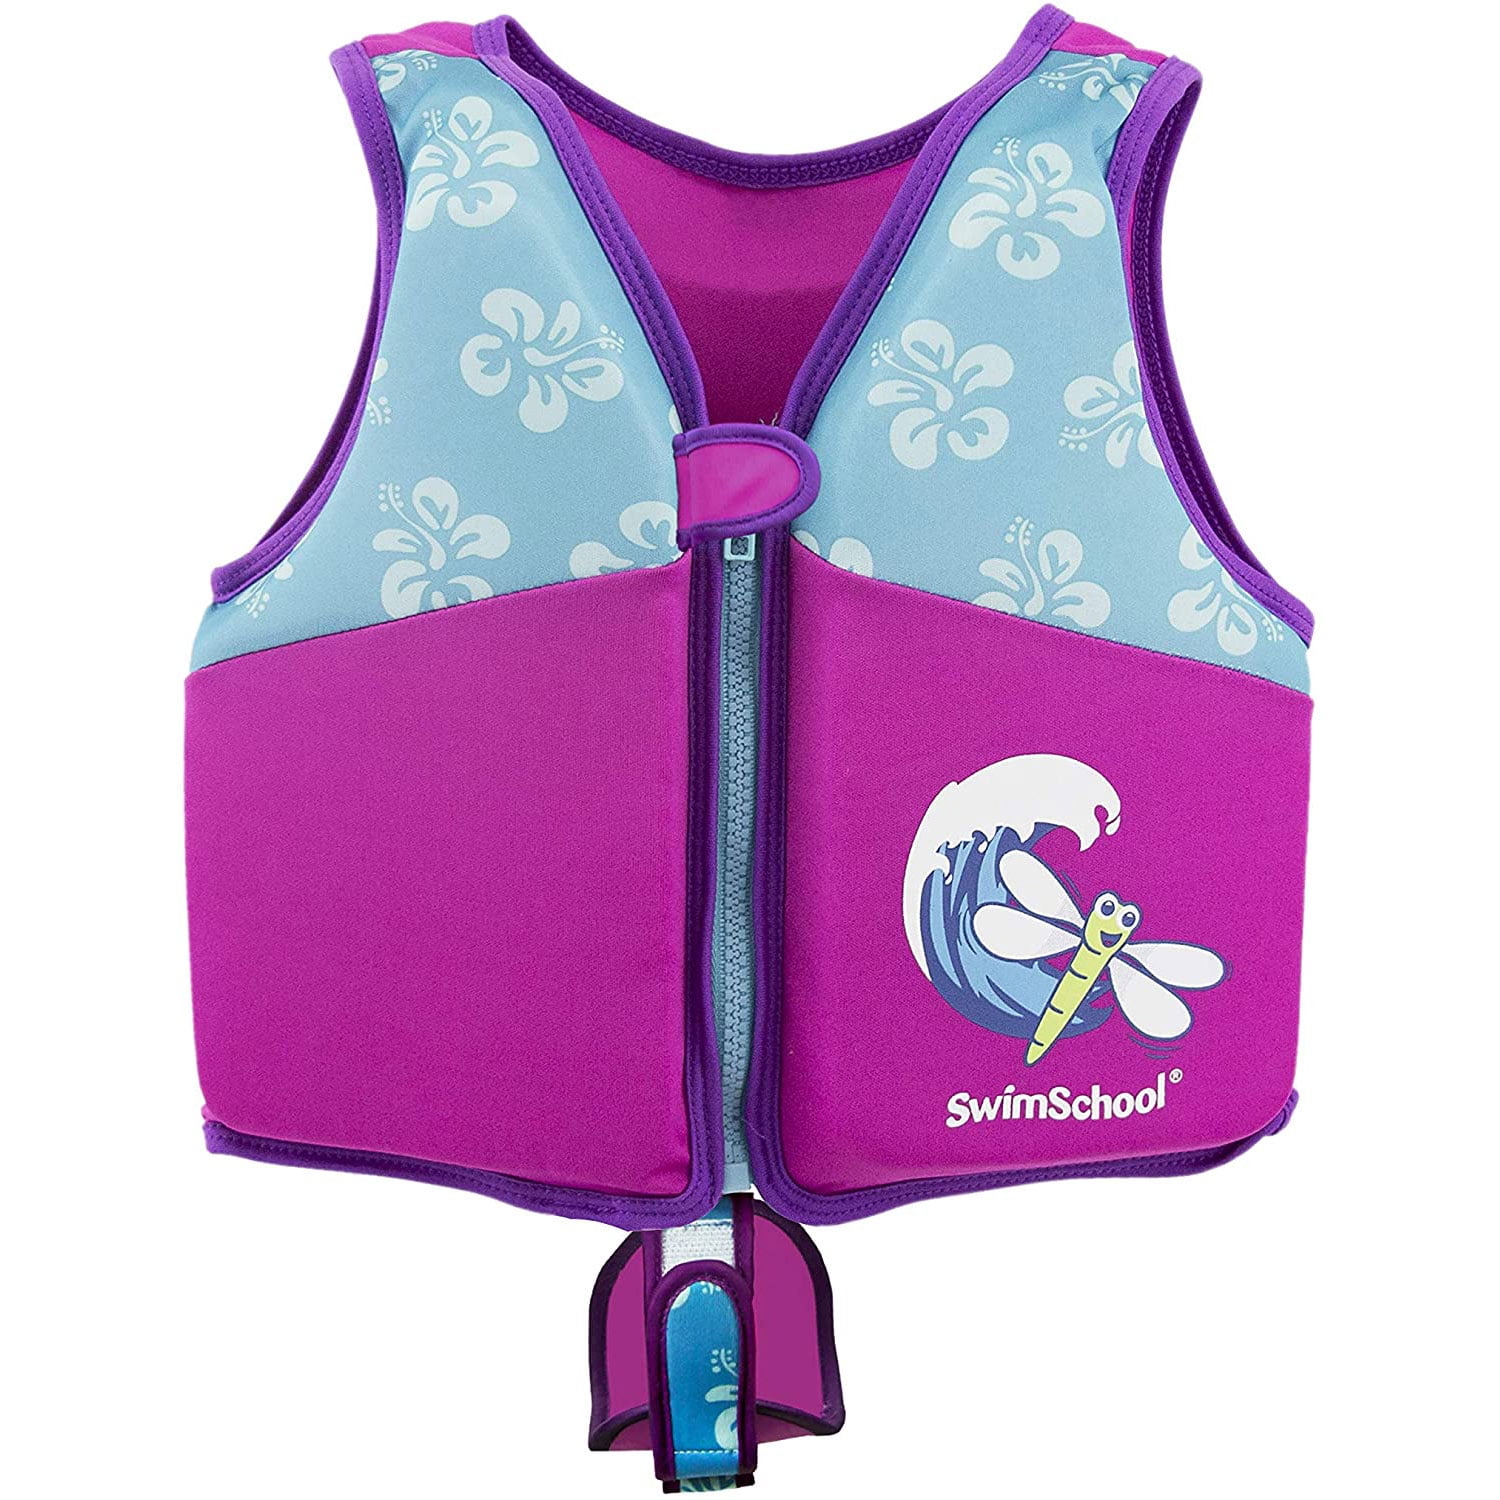 Speedo Printed Armbands Begin to Swim Level 2 Ages 2-12 Blue Purple Set of 3 for sale online 